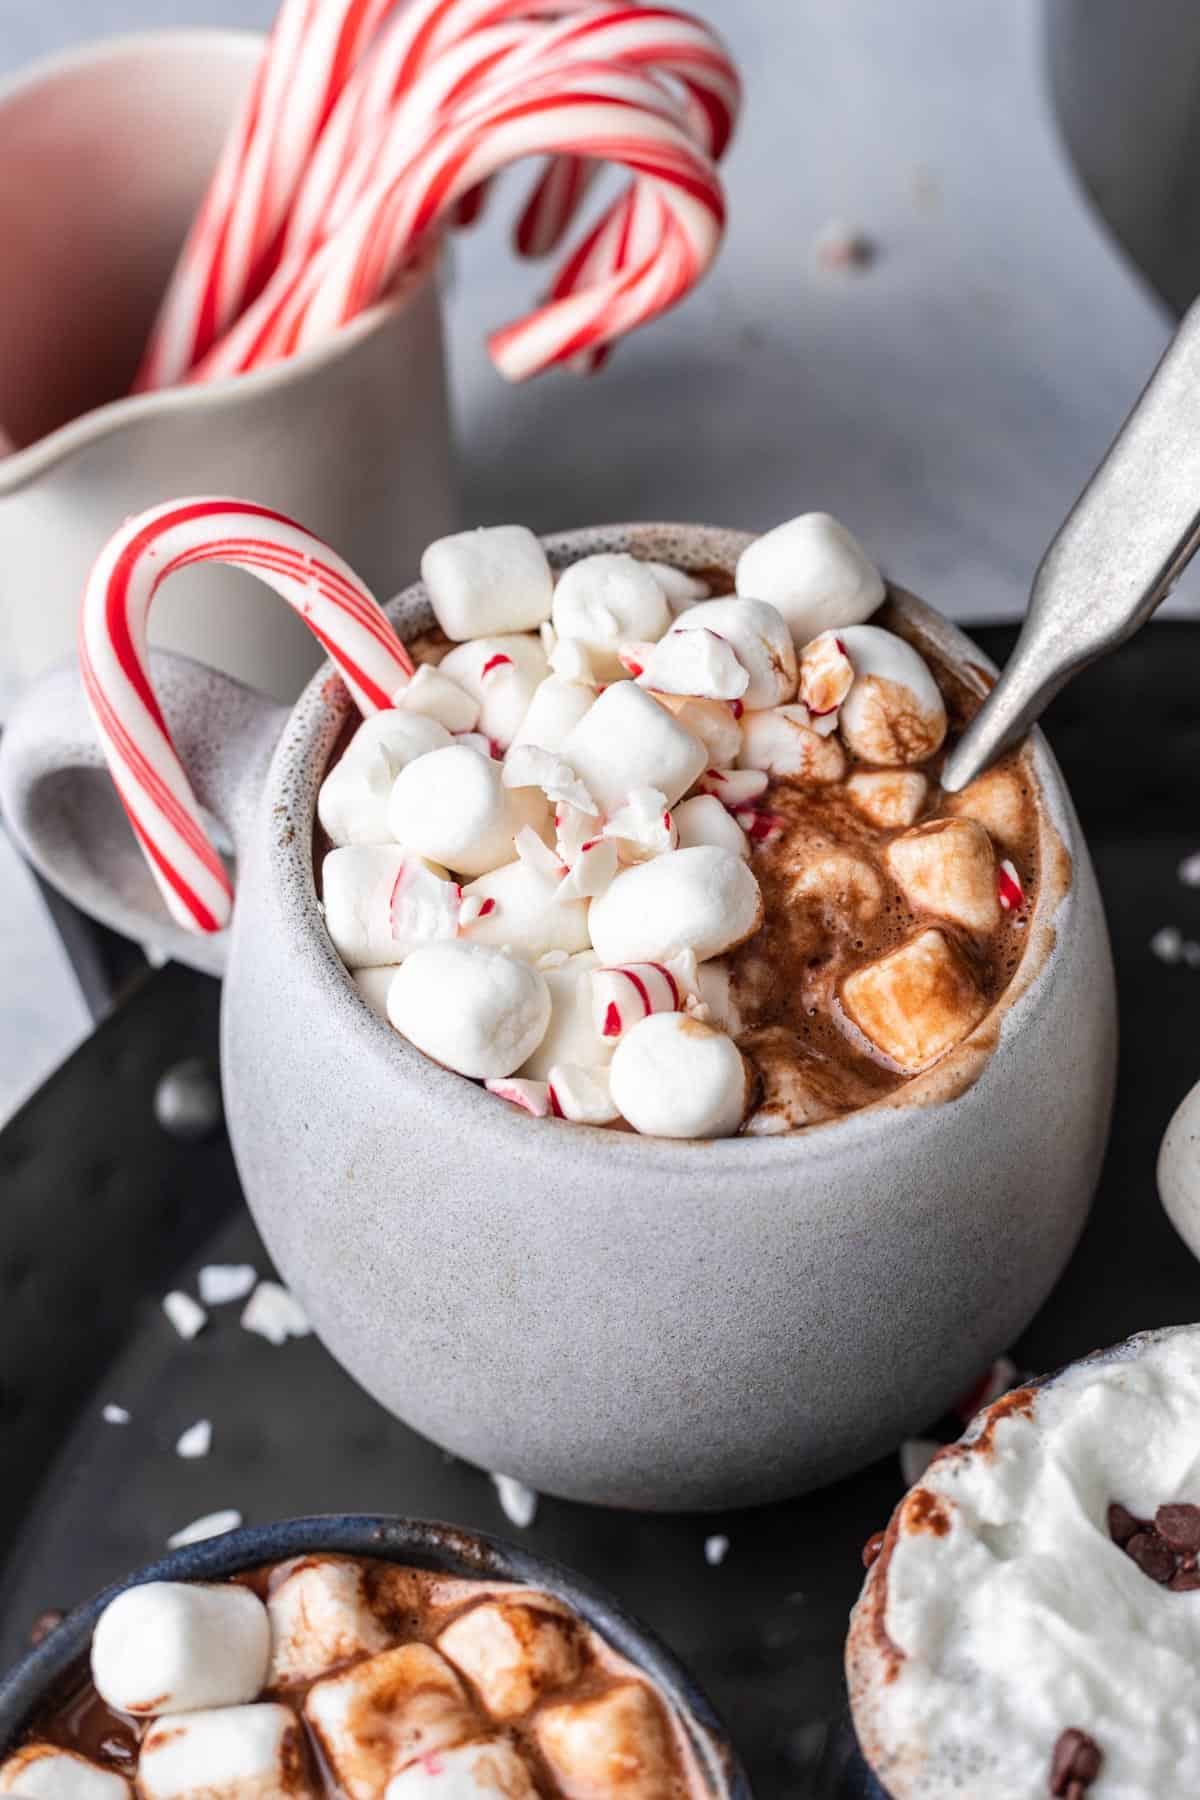 Instant pot hot chocolate in a gray mug with marshmallows and peppermint candies on top.